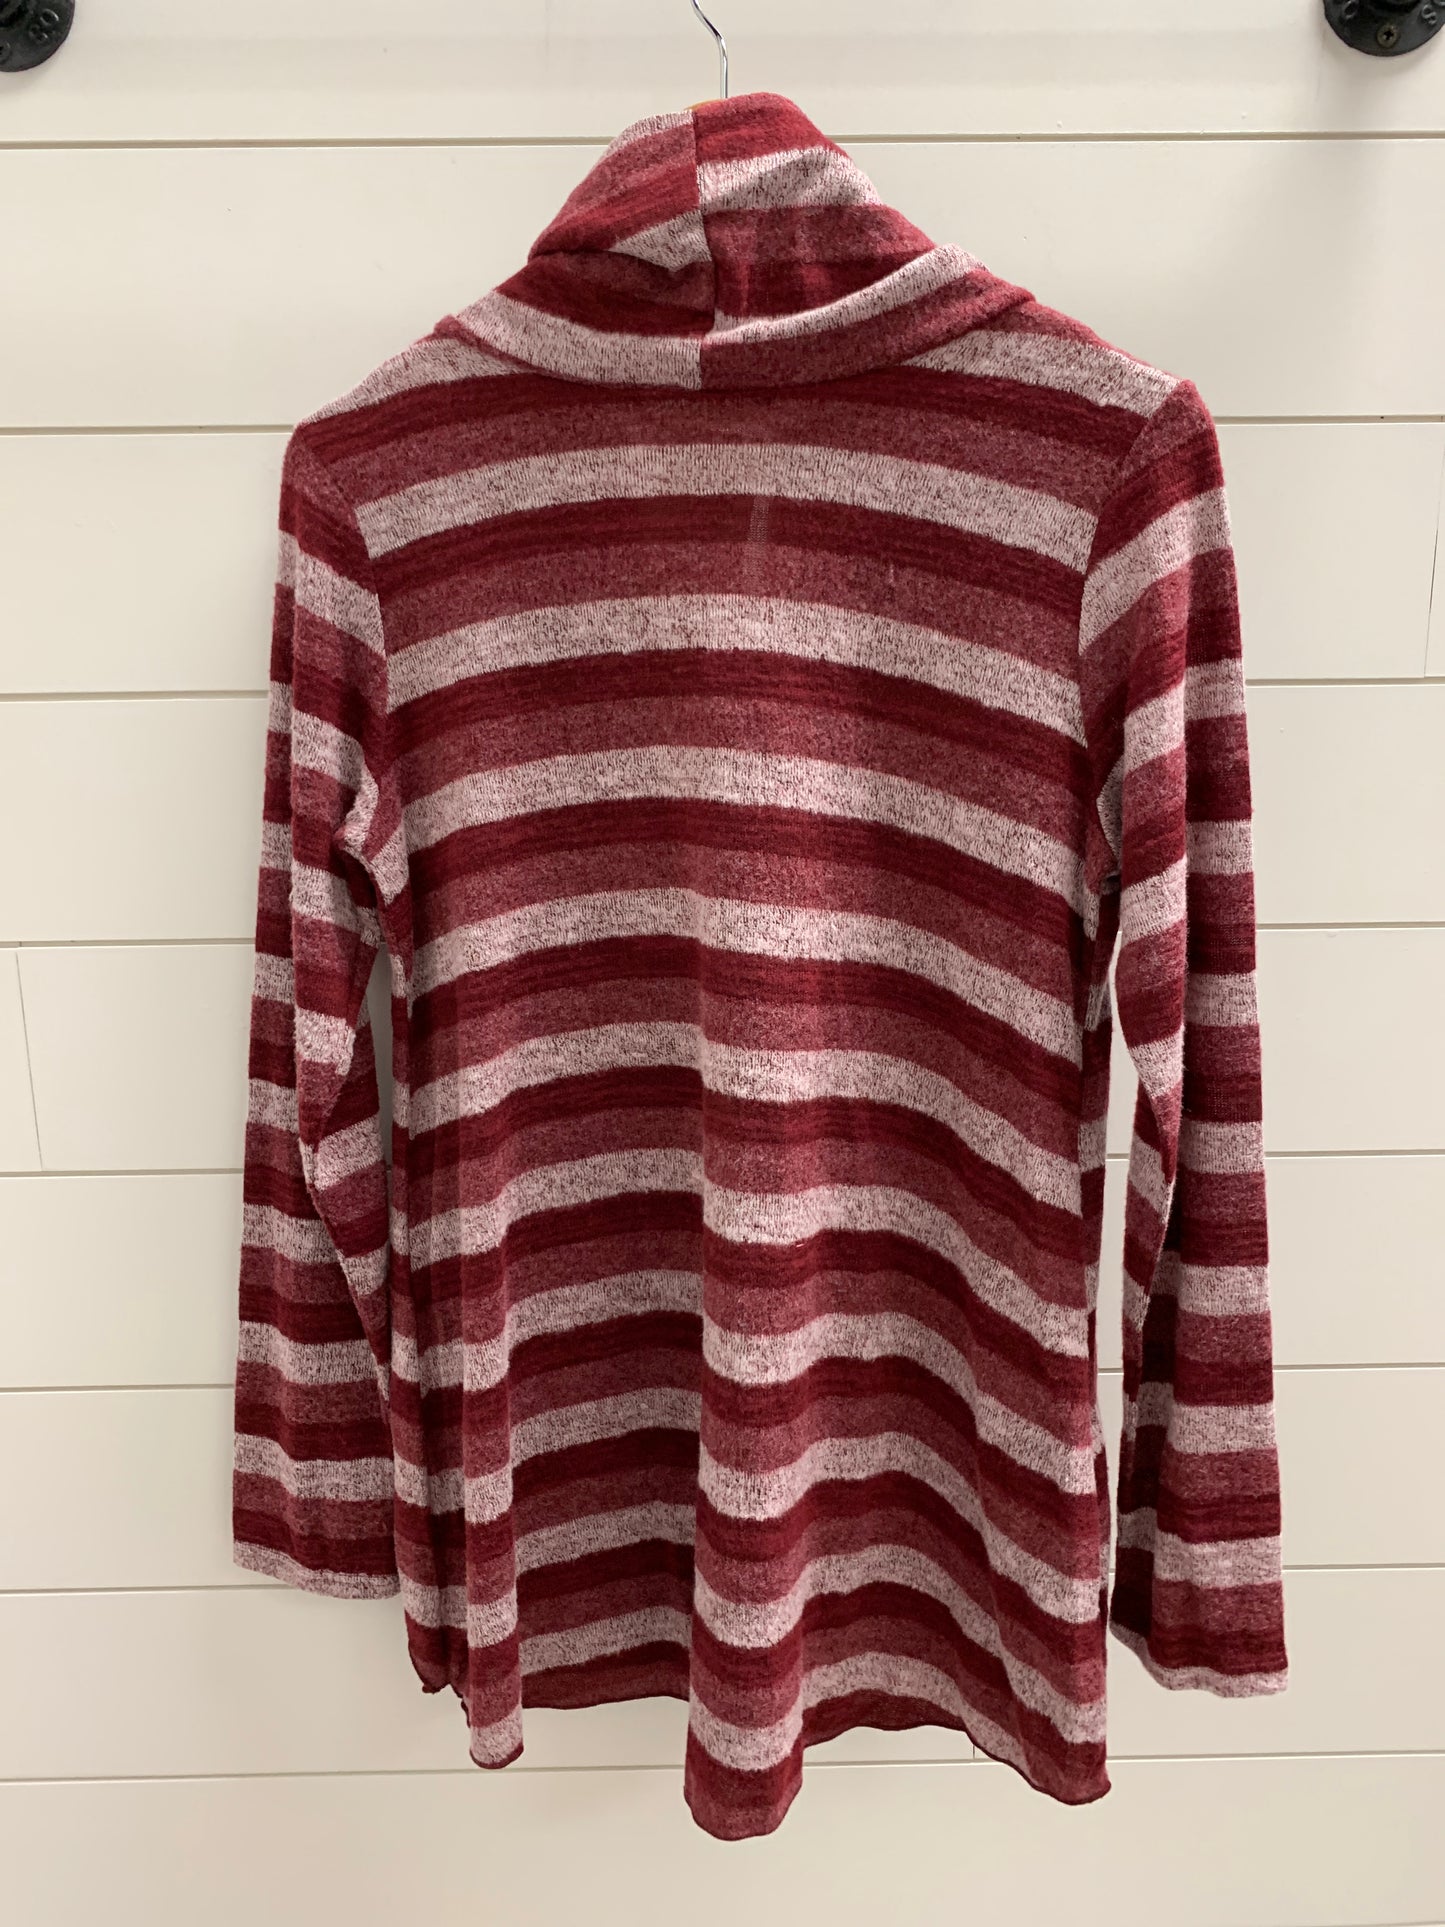 Striped knit cowl neck top with layeRed details